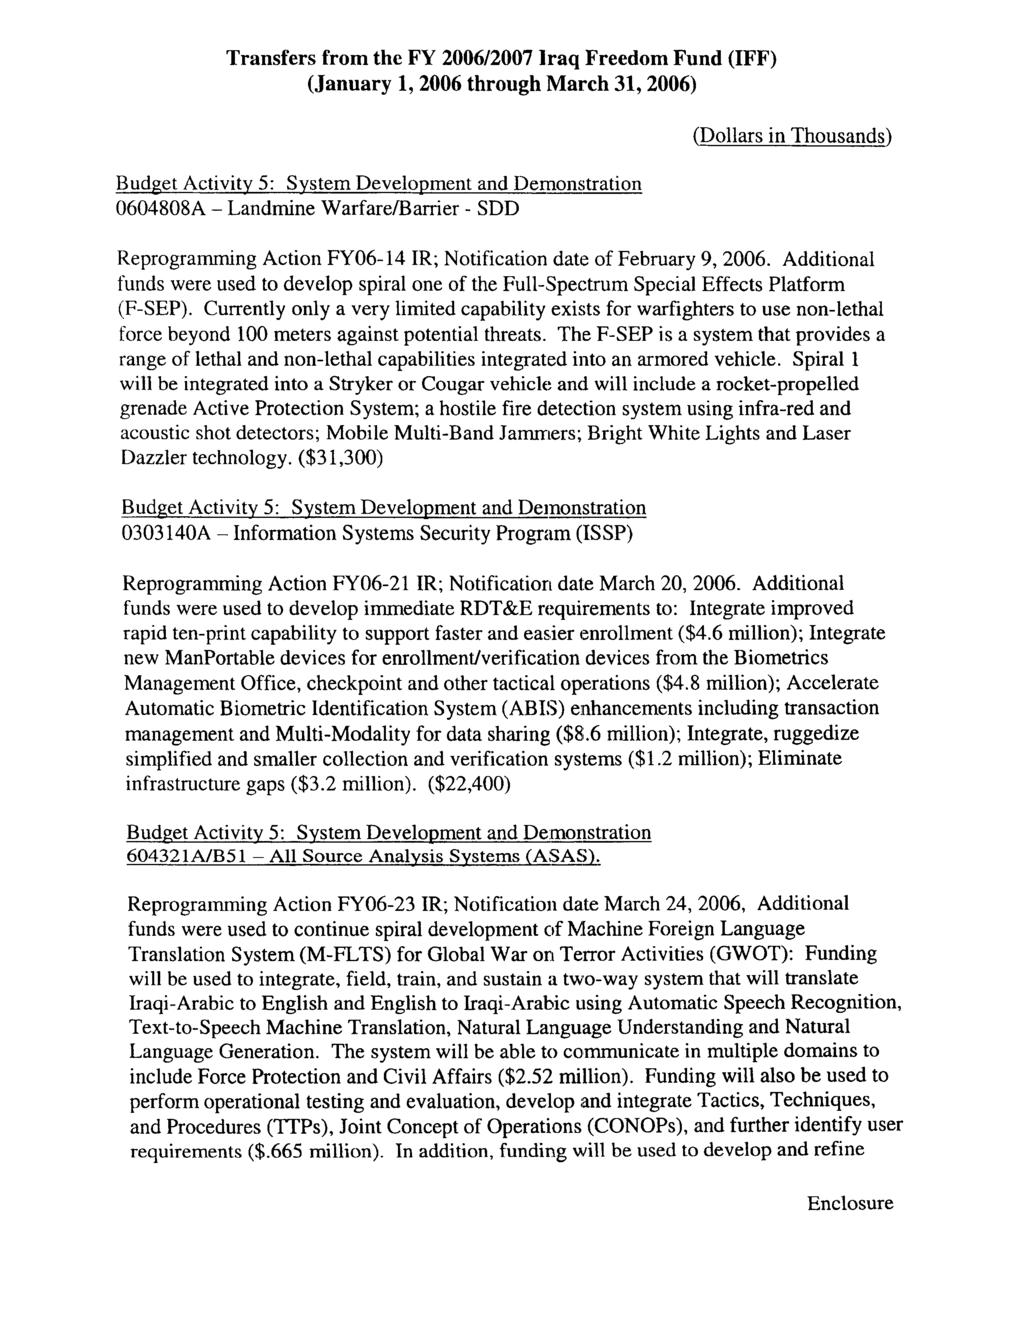 Transfers from the FY 2006/2007 Iraq Freedom Fund (IFF) (January 1, 2006 through March 31, 2006) Budget Activity 5: System Development and Demonstration 0604808A- Landmine Warfare/Barrier- SDD